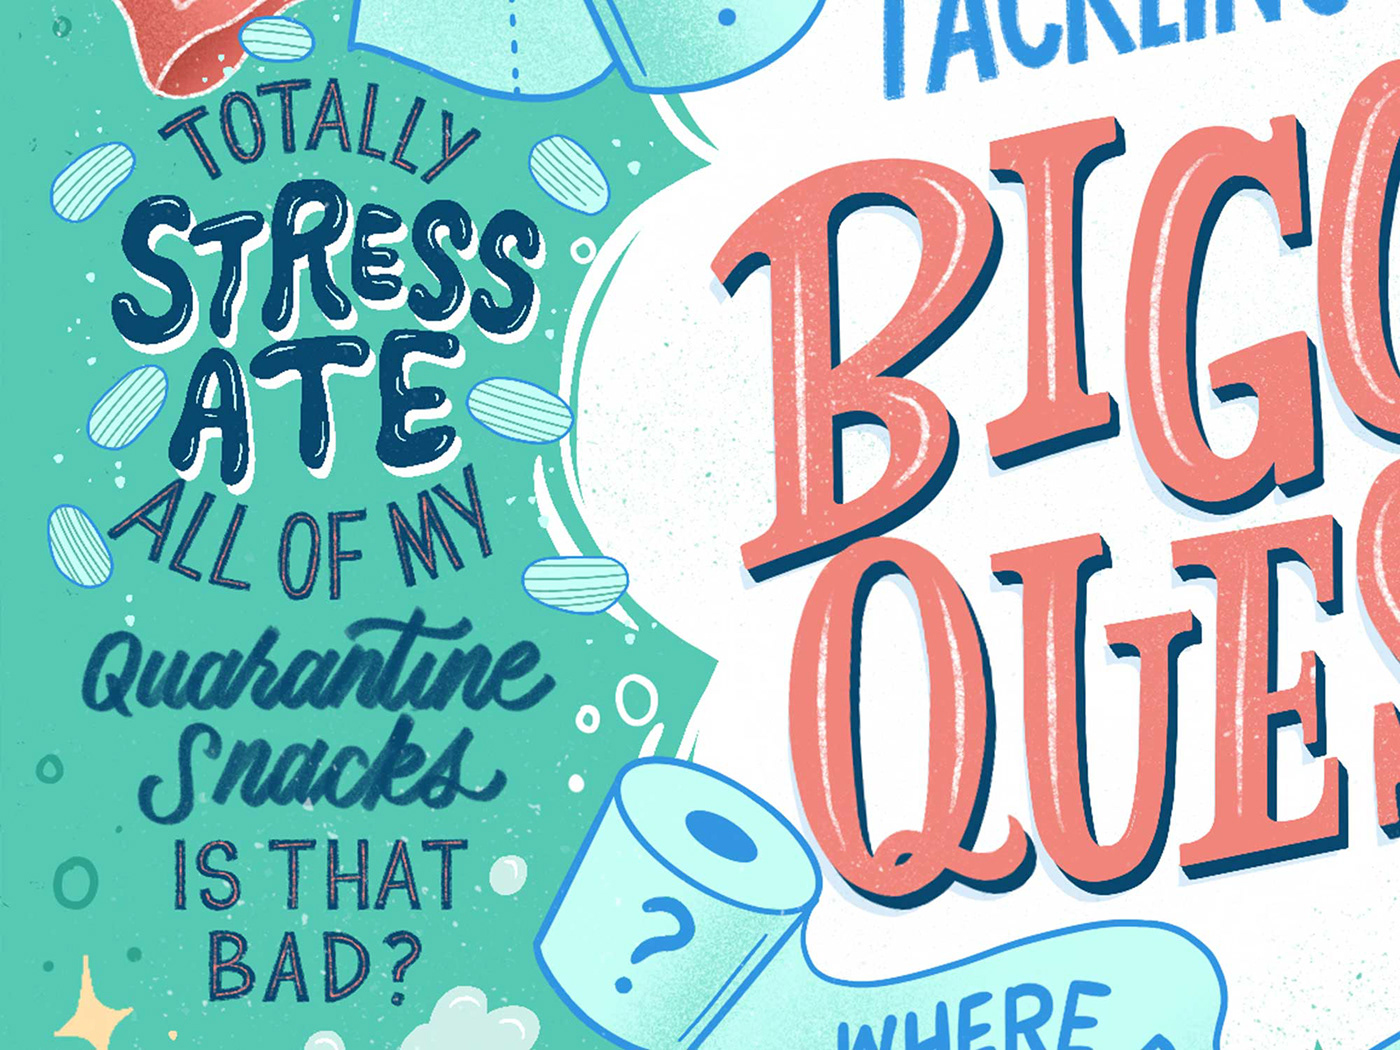 Magazine cover close up featuring hand lettered phrases playing off common quarantine situations 